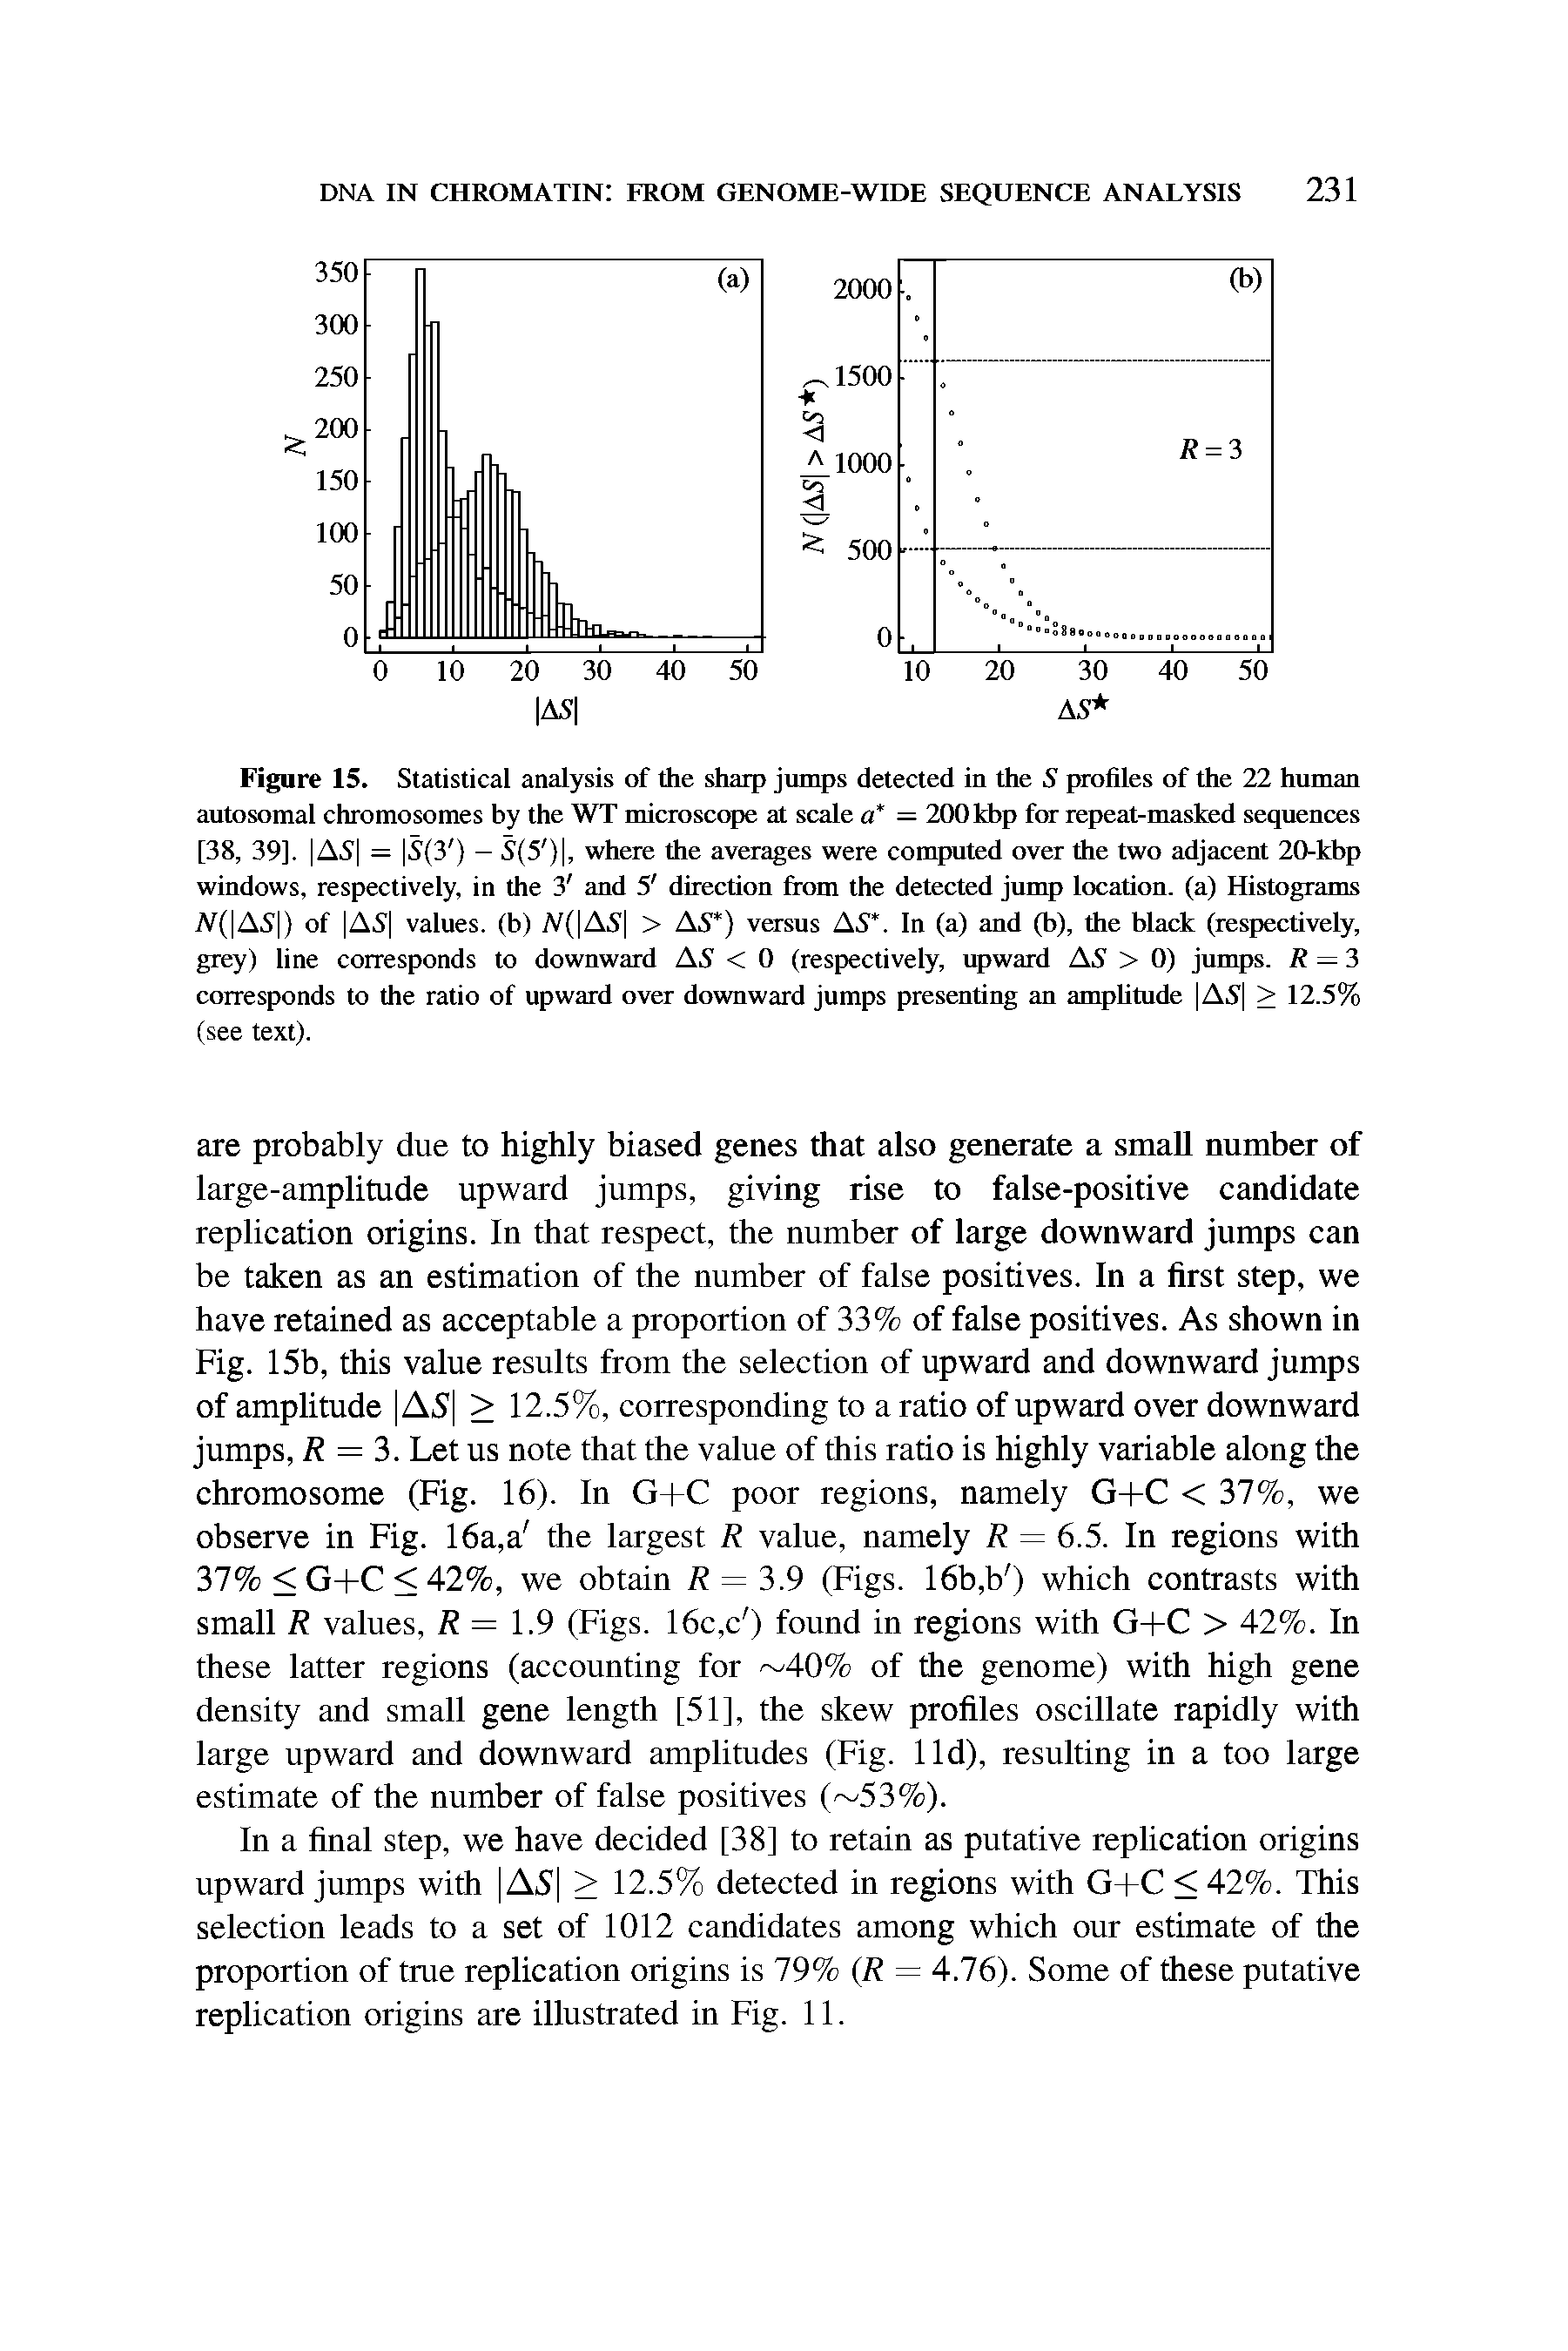 Figure 15. Statistical analysis of the sharp jumps detected in the S profiles of the 22 human autosomal chromosomes by the WT microscope at scale a = 200 kbp for repeat-masked sequences [38, 39]. AS = S(3 ) — S(5 ), where the averages were computed over the two adjacent 20-kbp windows, respectively, in the 3 and 5 direction from the detected jump location, (a) Histograms Af( AS ) of AS values, (b) A( AS > AS ) versus AS. In (a) and (b), the black (respectively, grey) line corresponds to downward AS < 0 (respectively, upward AS > 0) jumps. R = 3 corresponds to the ratio of upward over downward jumps presenting an amphmde AS > 12.5% (see text).